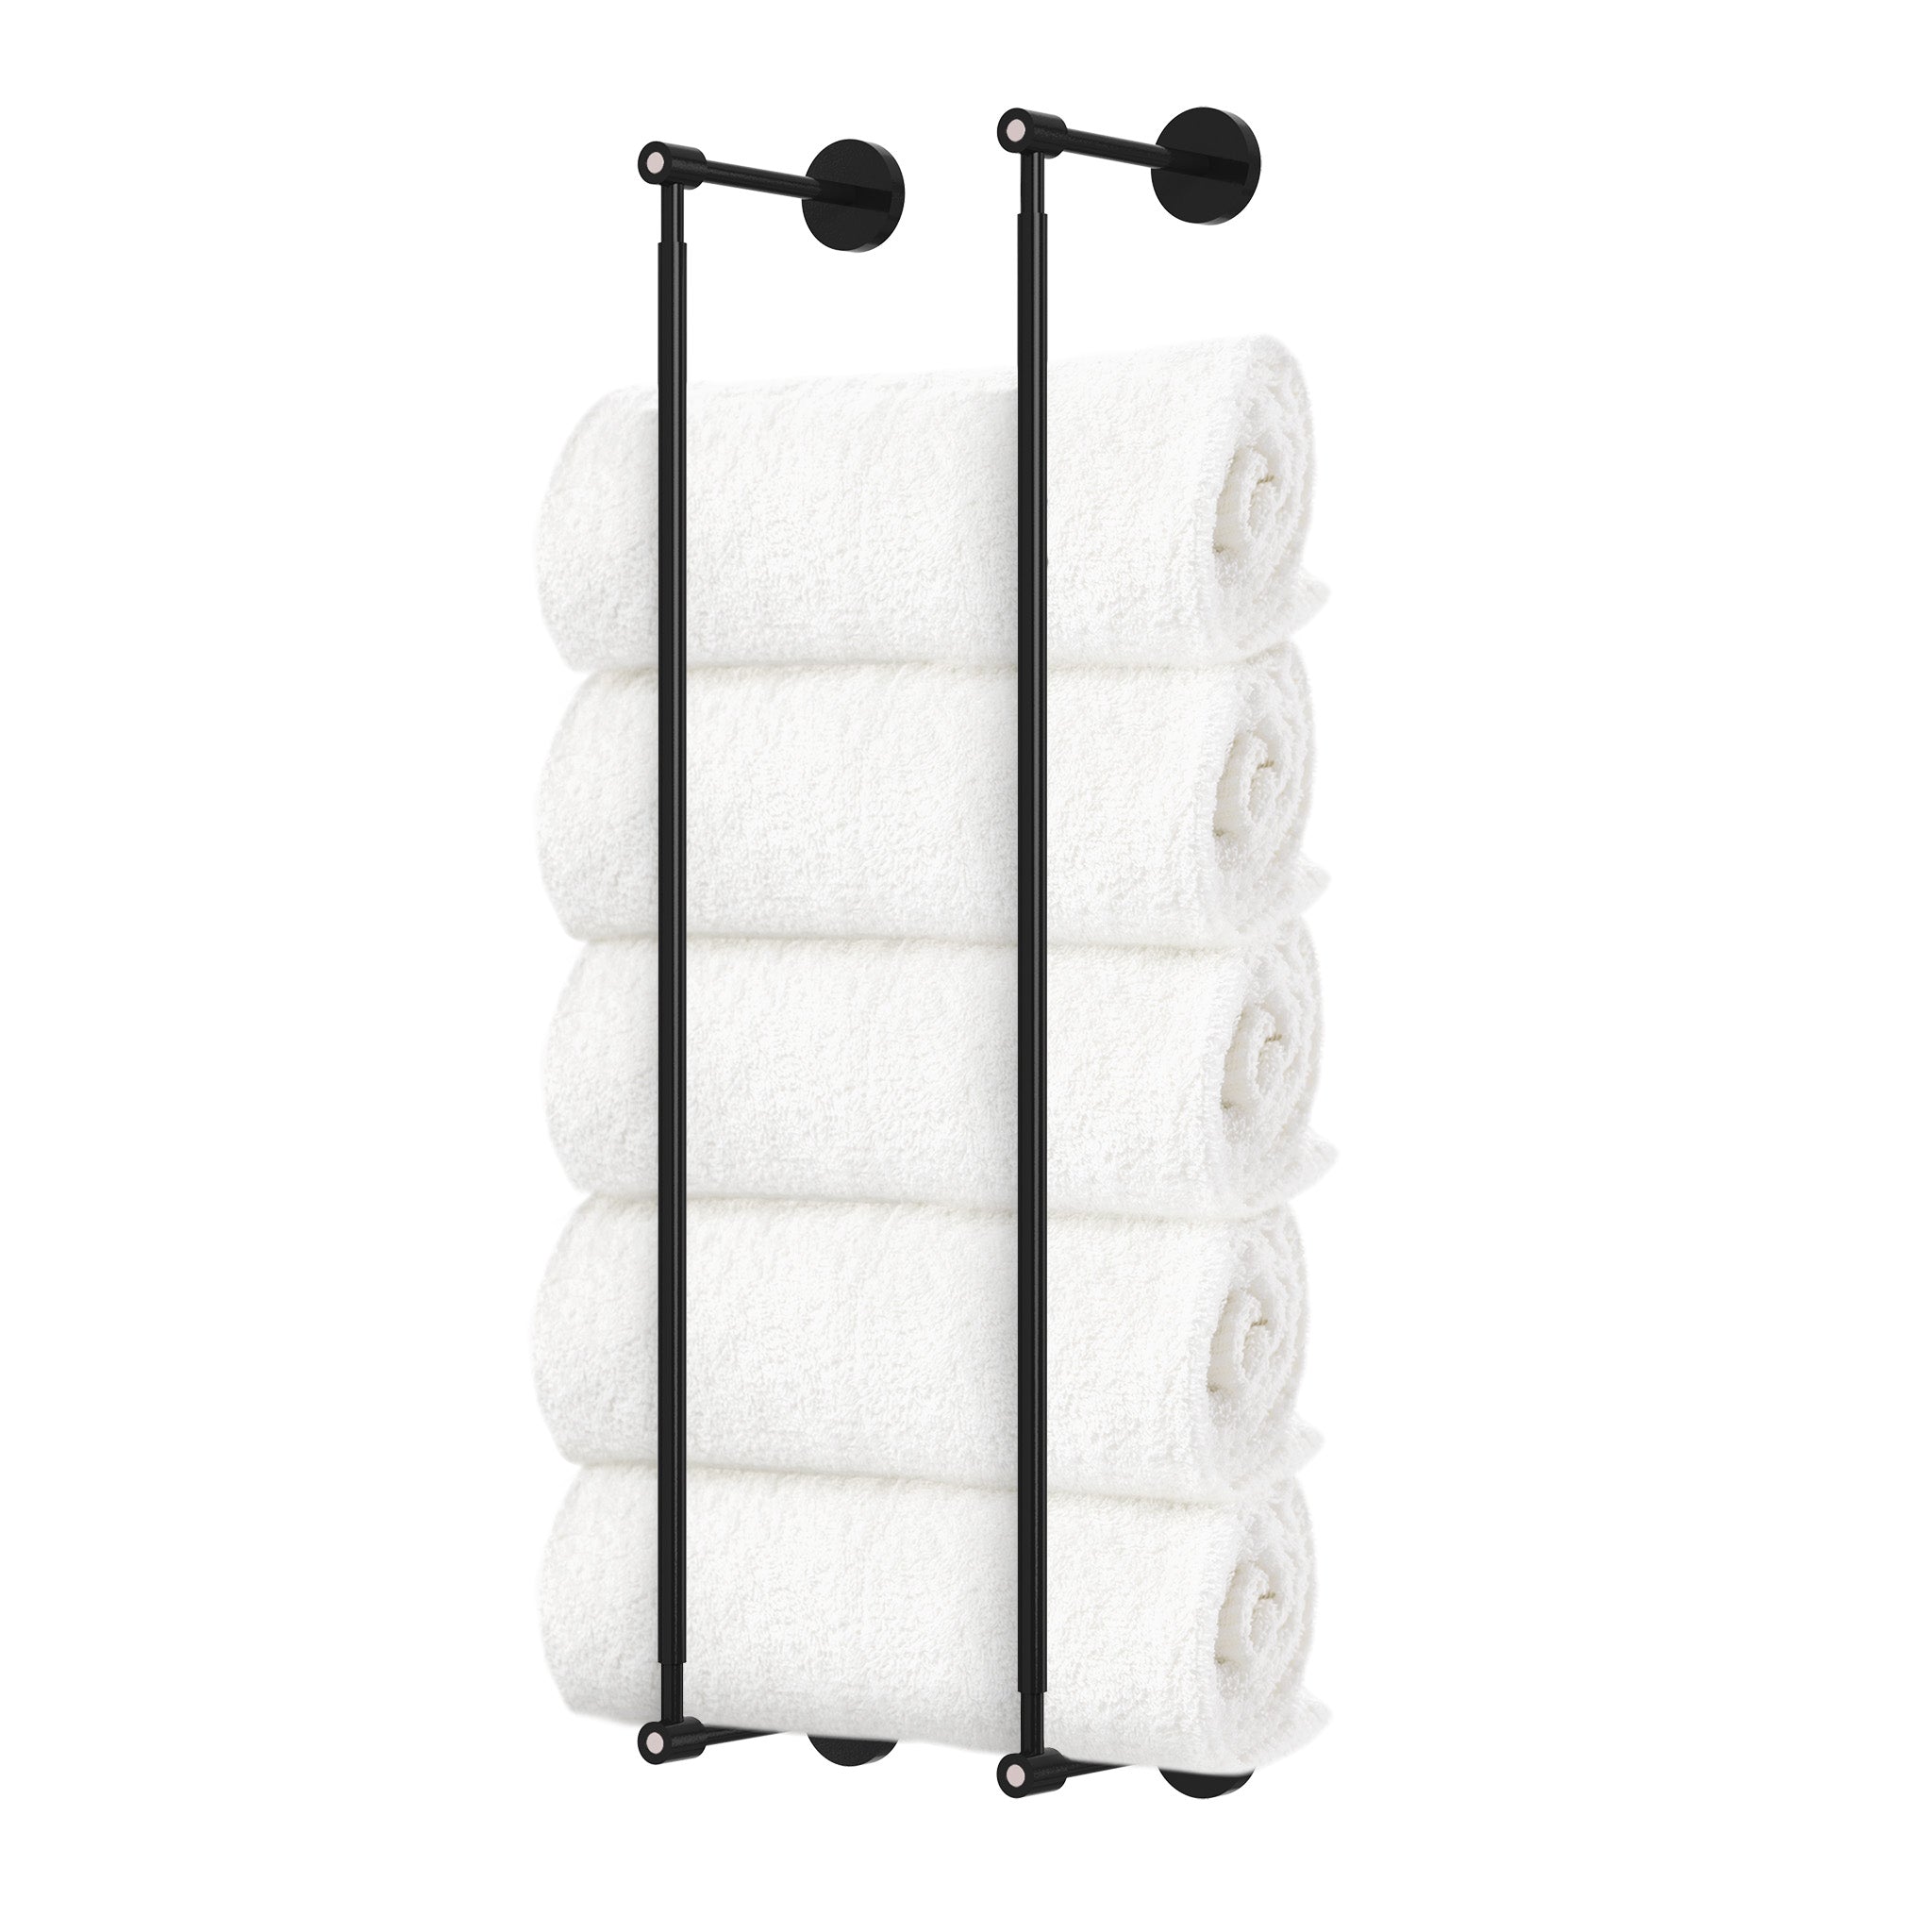 Black and barely head towel rack 24 inch dutton brown hardware